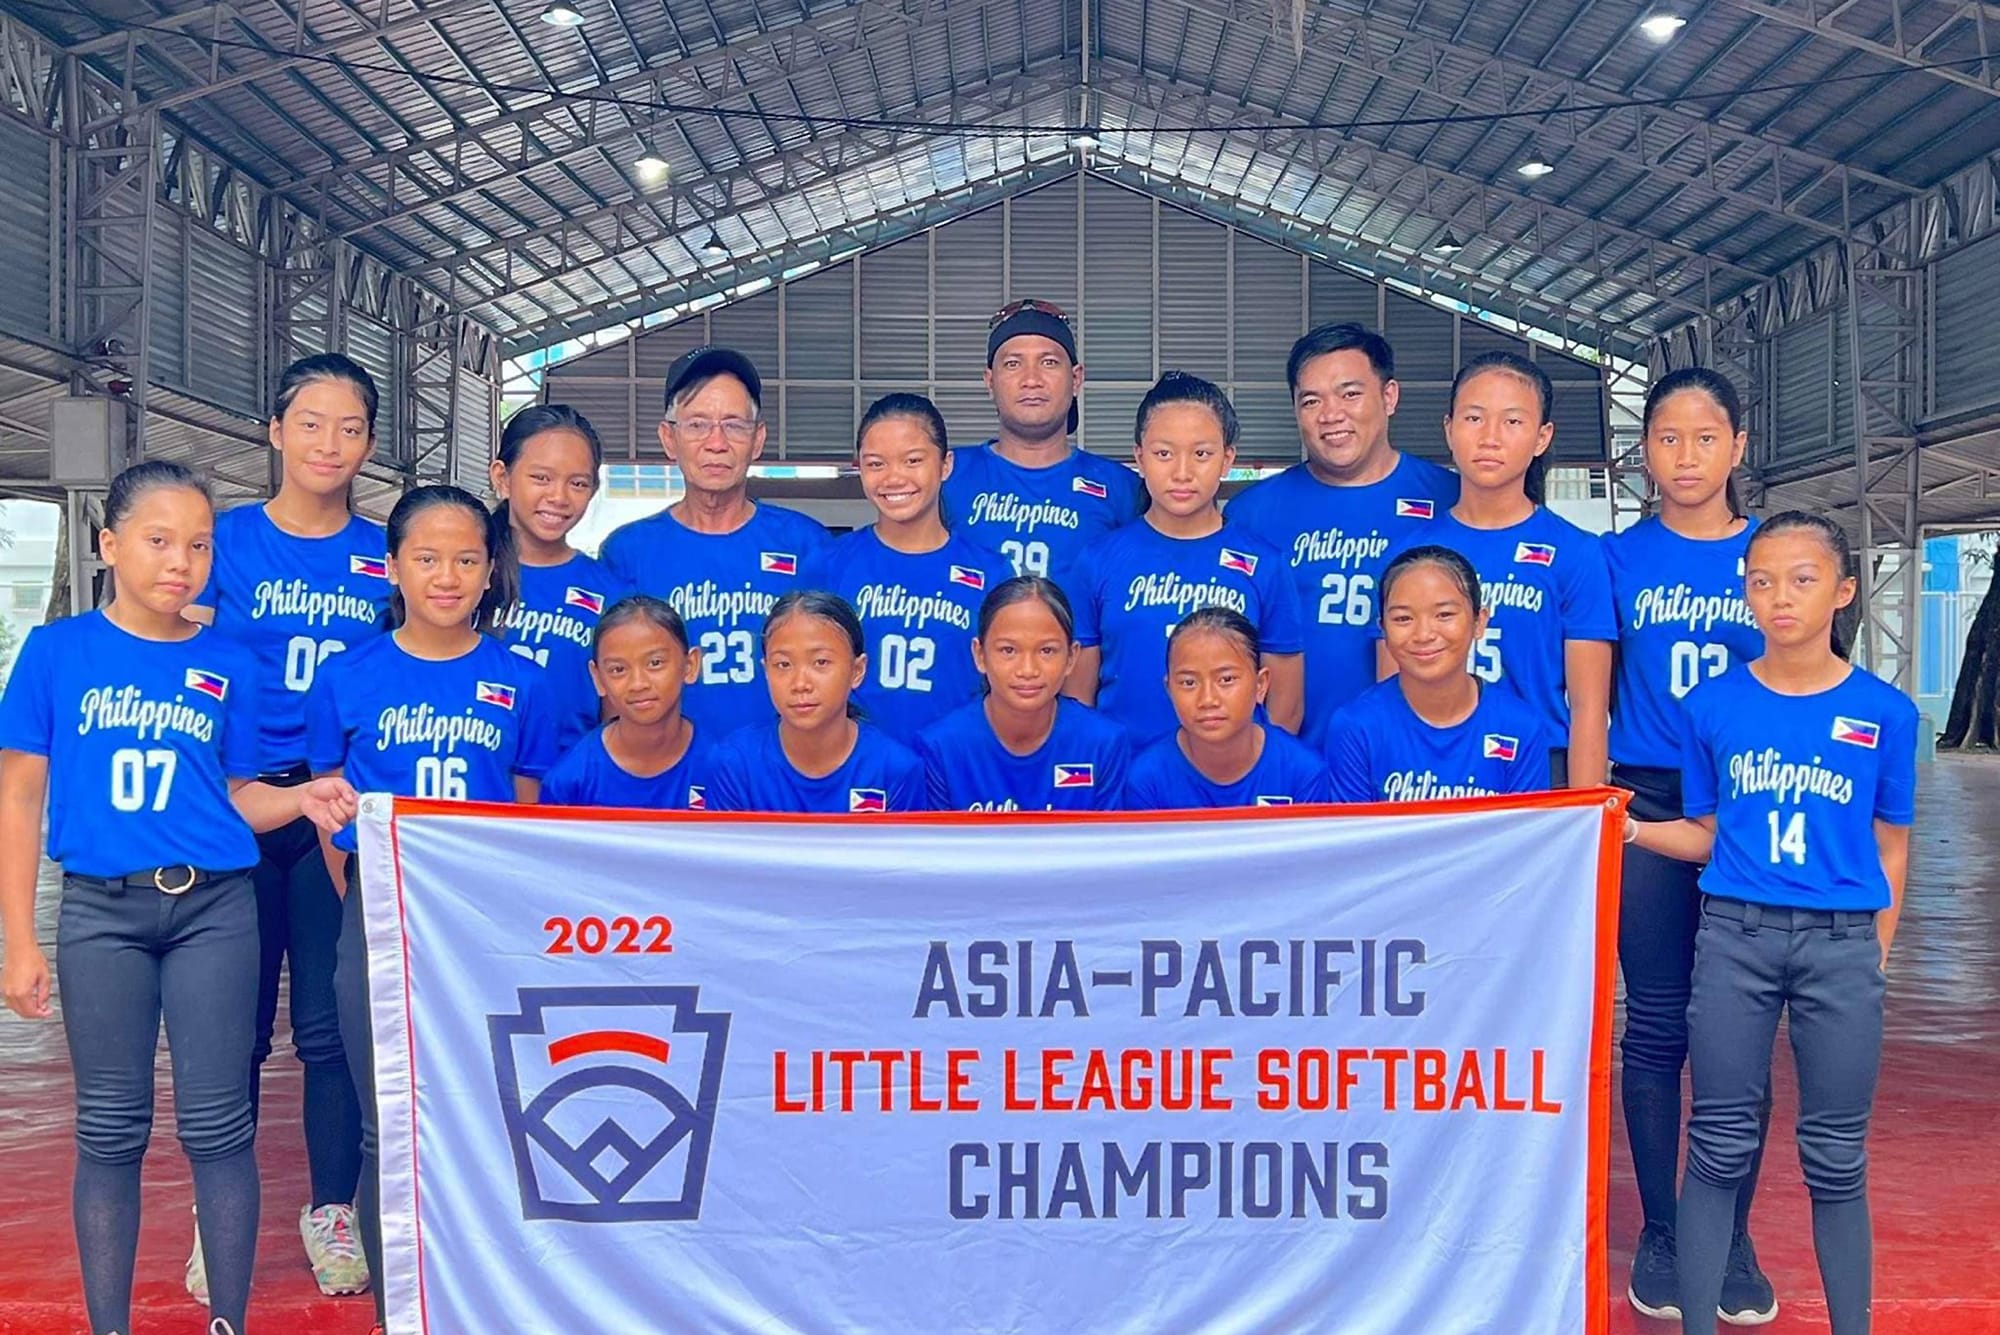 Negros Occidental Little League to Represent AsiaPacific Region at the